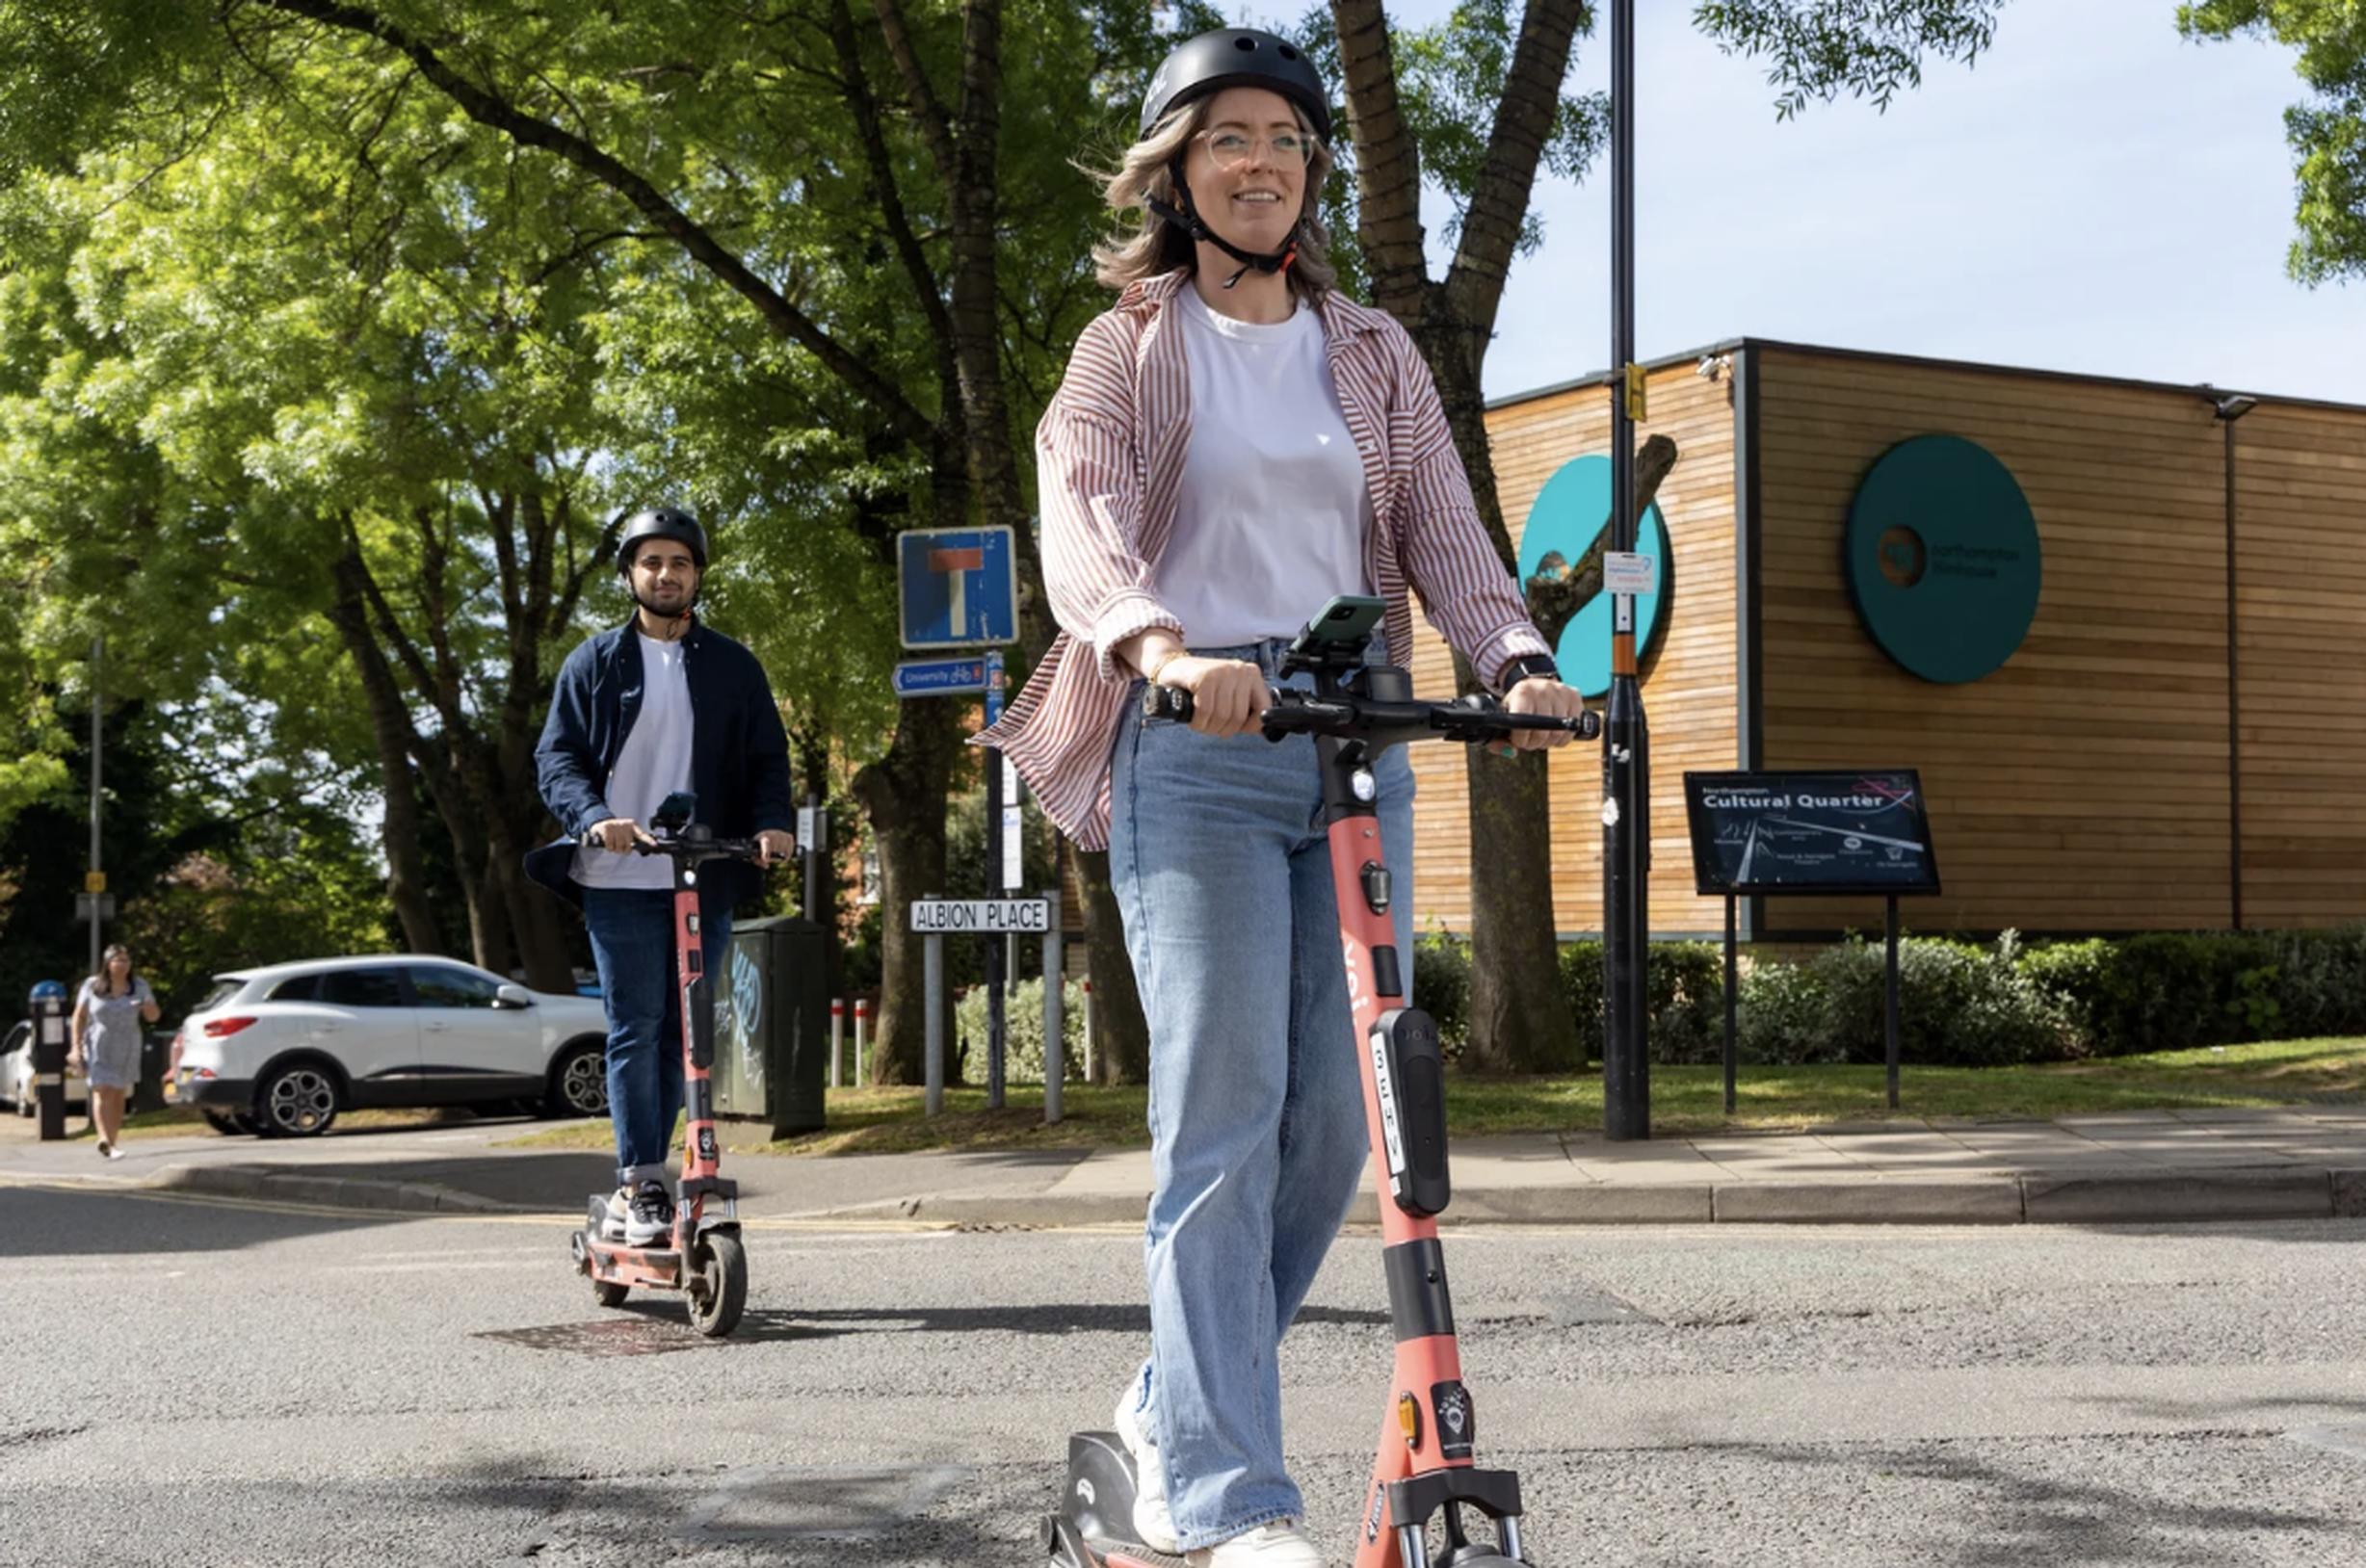 Many e-scooter trial schemes in the UK have been extended until May 2024